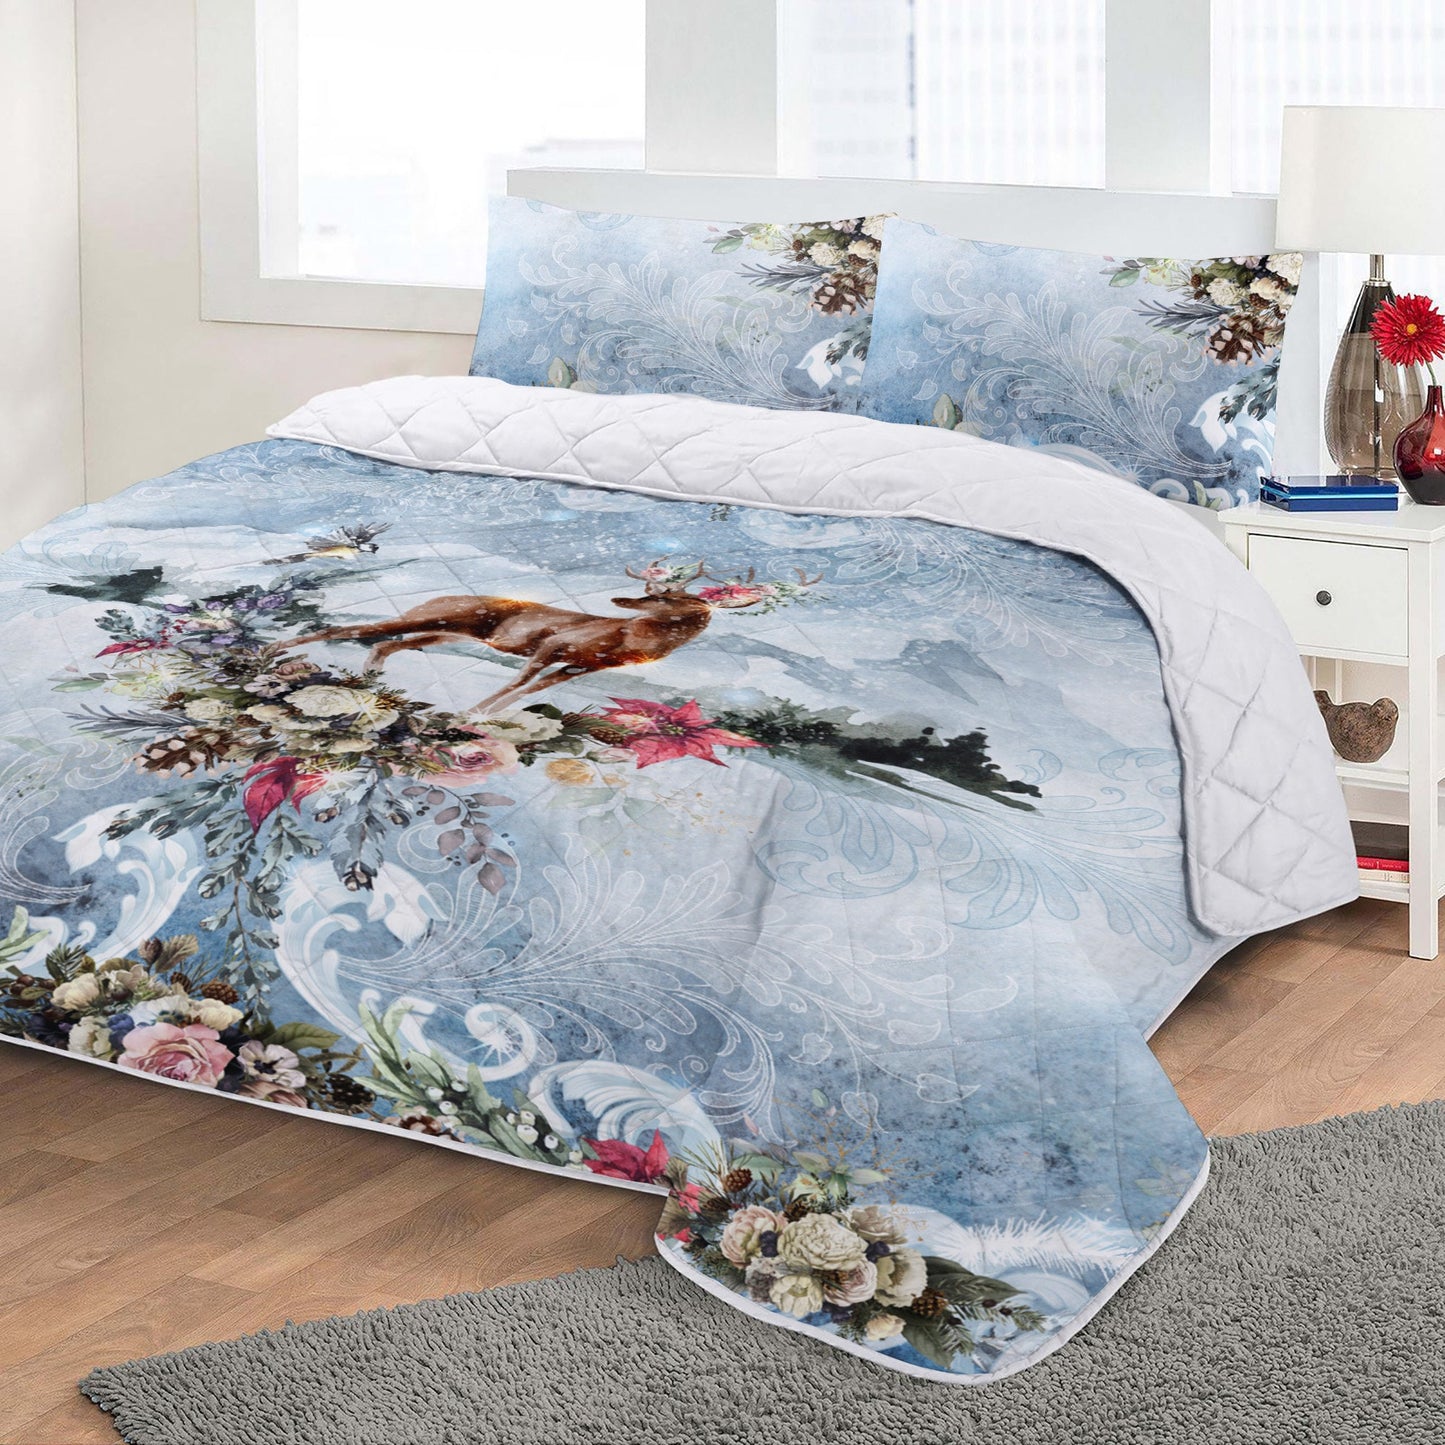 Magic Christmas design with deer Personalised Thin quilt • bedspread • blanket for your bedroom decoration